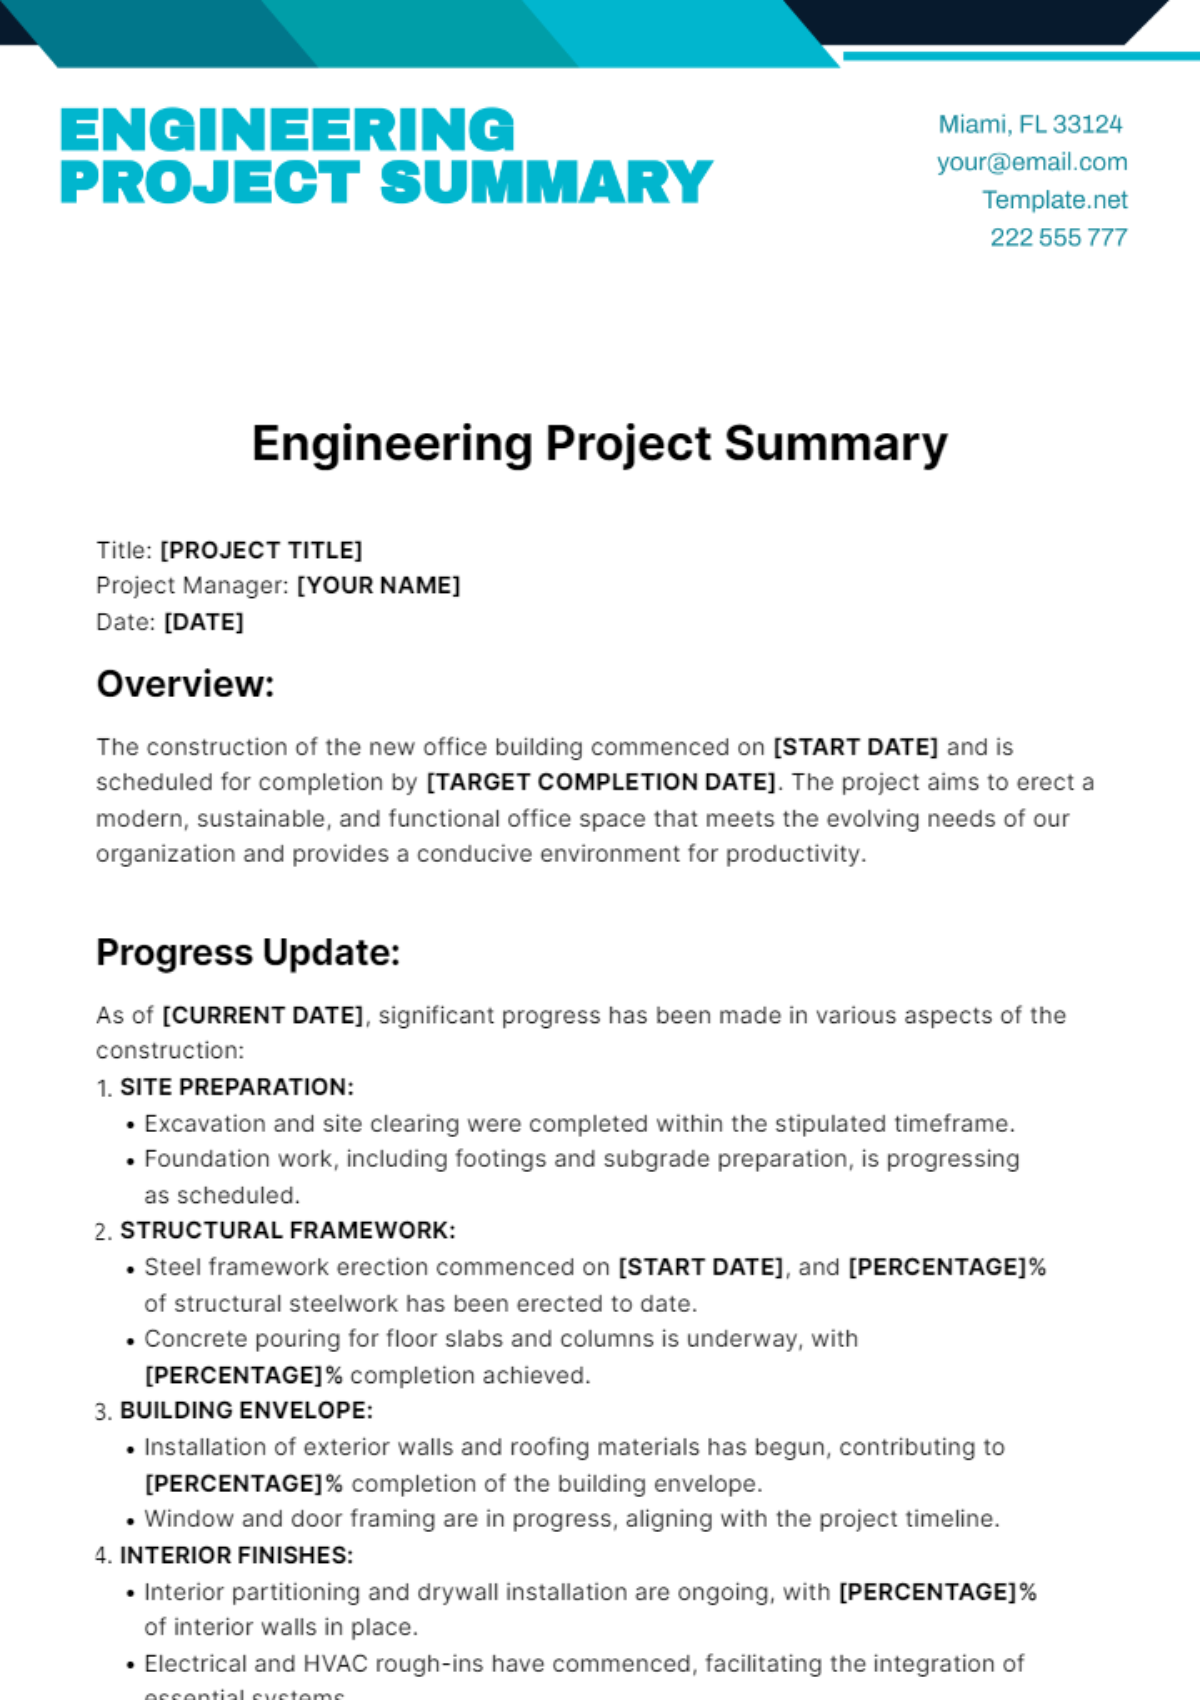 Free Engineering Project Summary Template